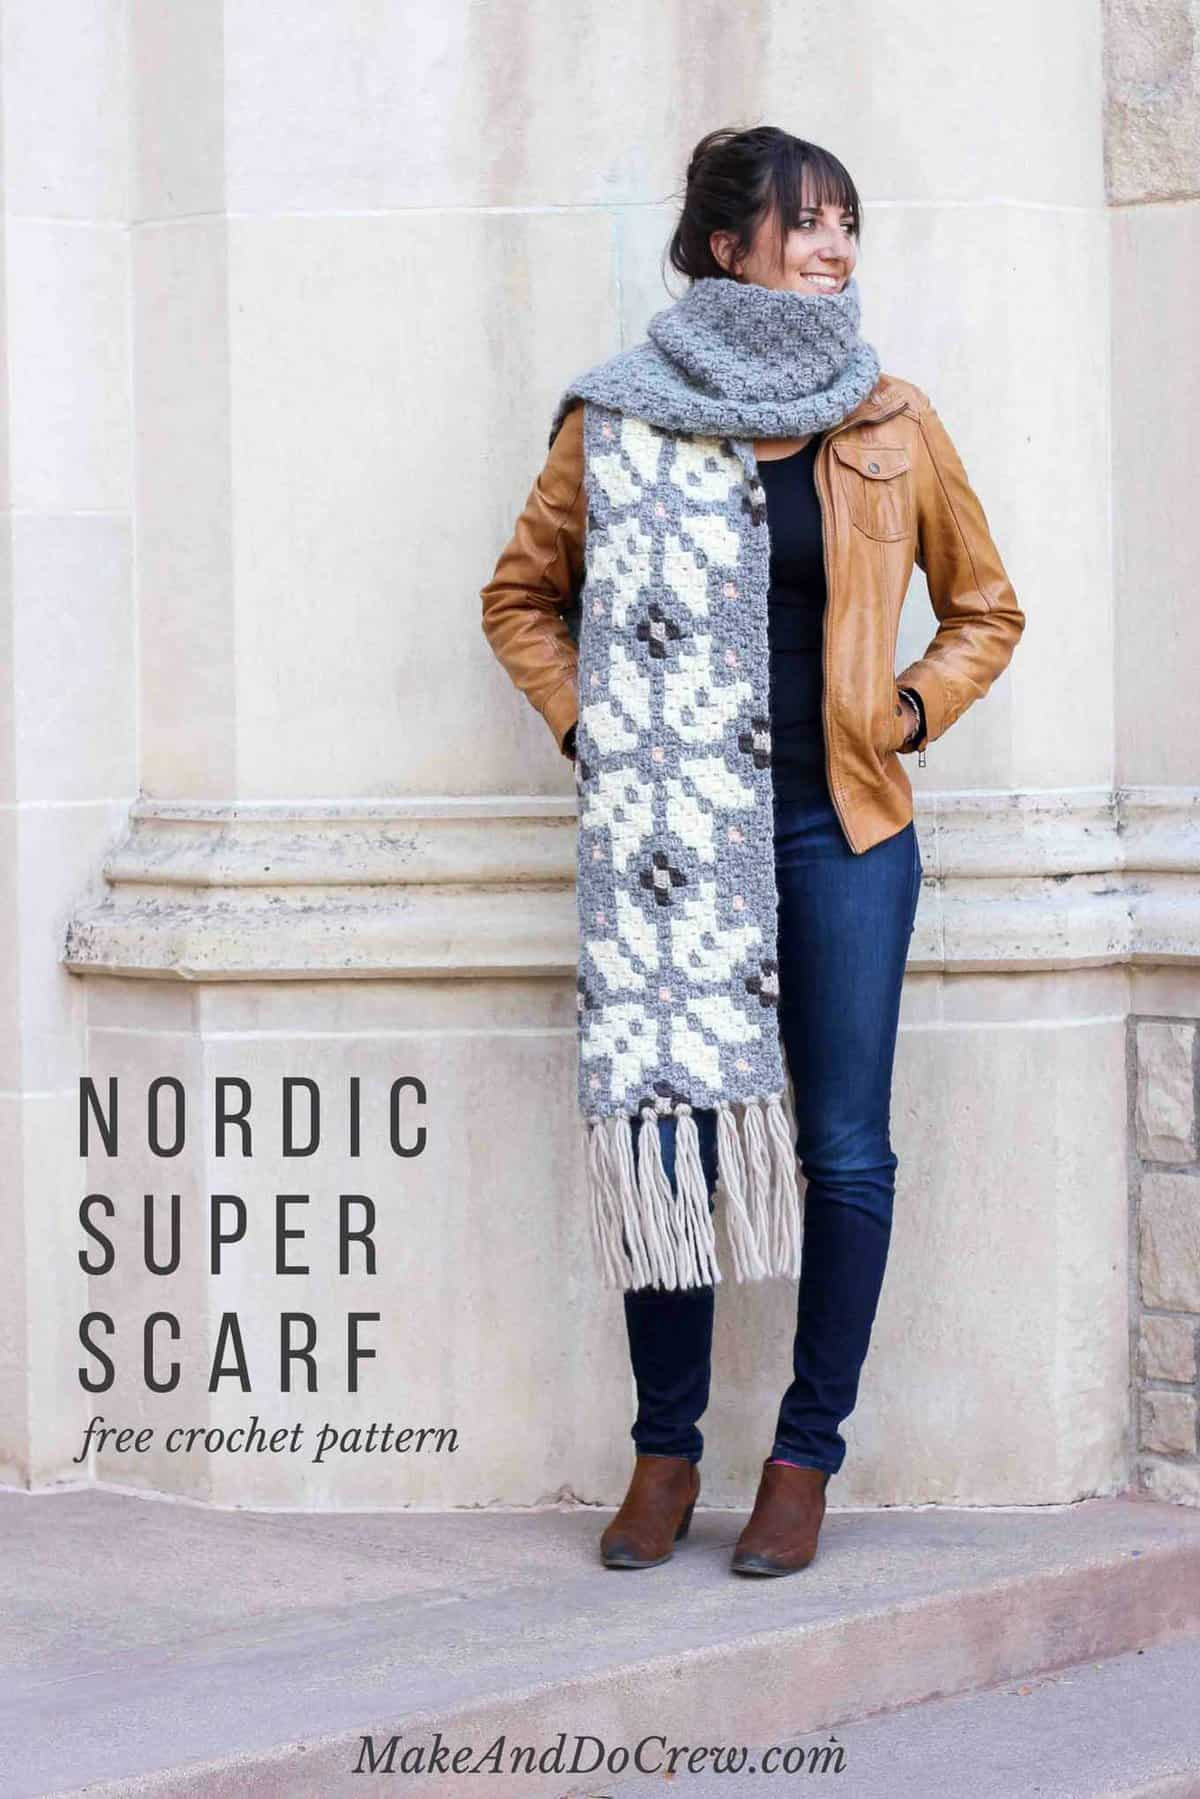 Whether you live in the North Pole or just want to jump on the super scarf trend, this nordic crochet super scarf pattern will keep you feeling warm, but lookin' hot all winter long. Click to download the free c2c graph pattern that looks like intarsia crochet.